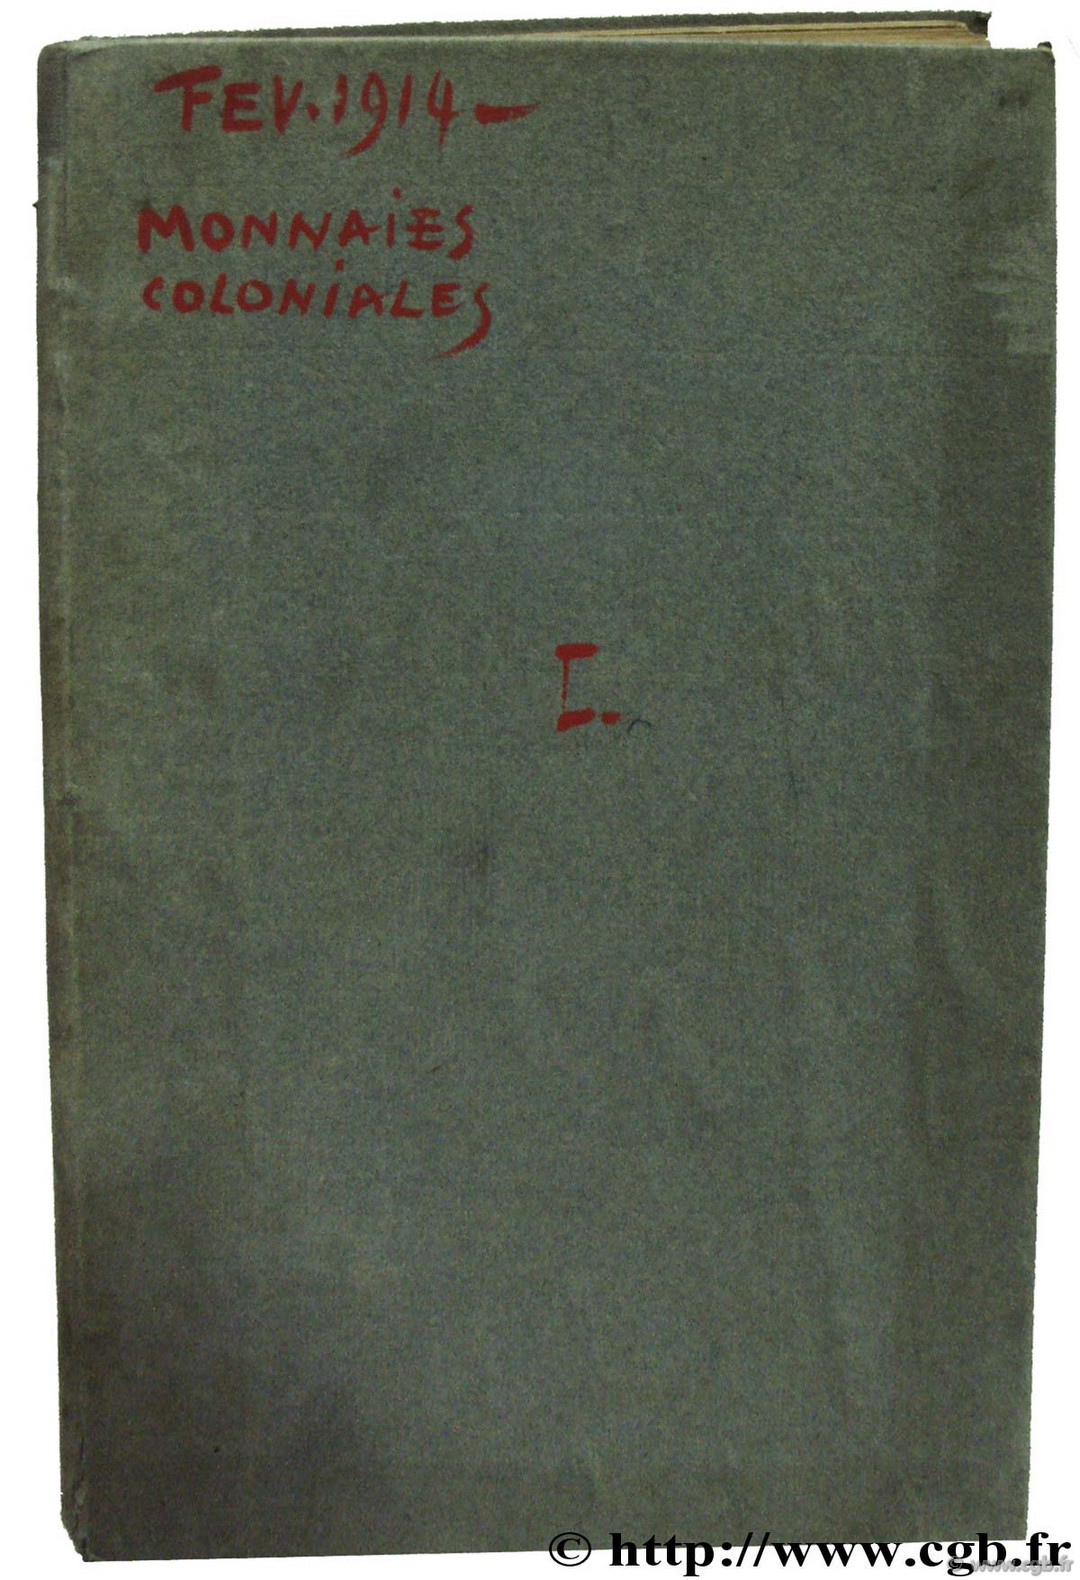 Monnaies coloniales - Collection Henry Thomas Grogan 